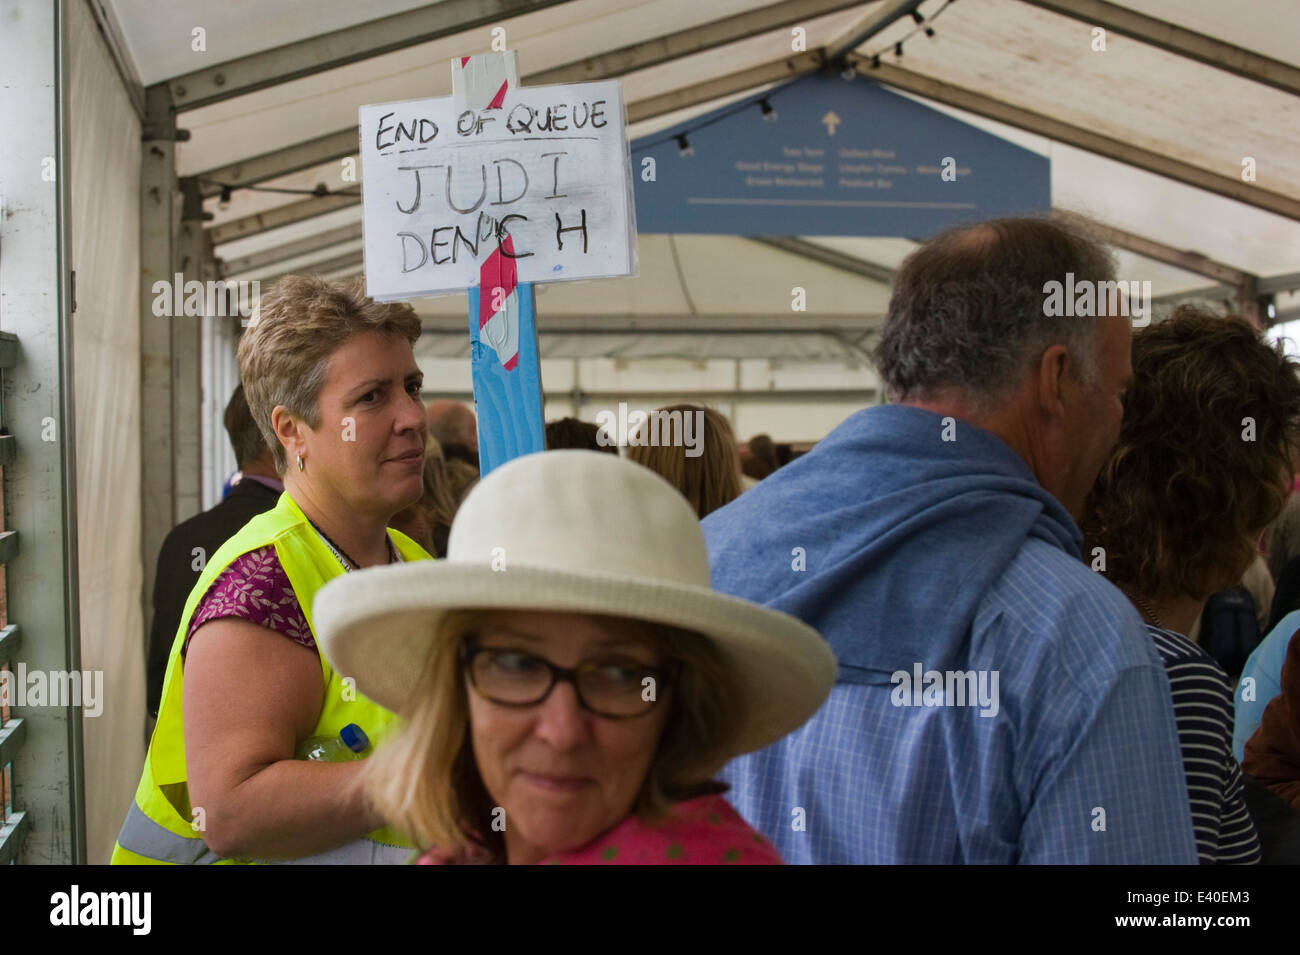 Steward with END OF QUEUE FOR JUDI DENCH sign at Hay Festival 2014 ©Jeff Morgan Stock Photo